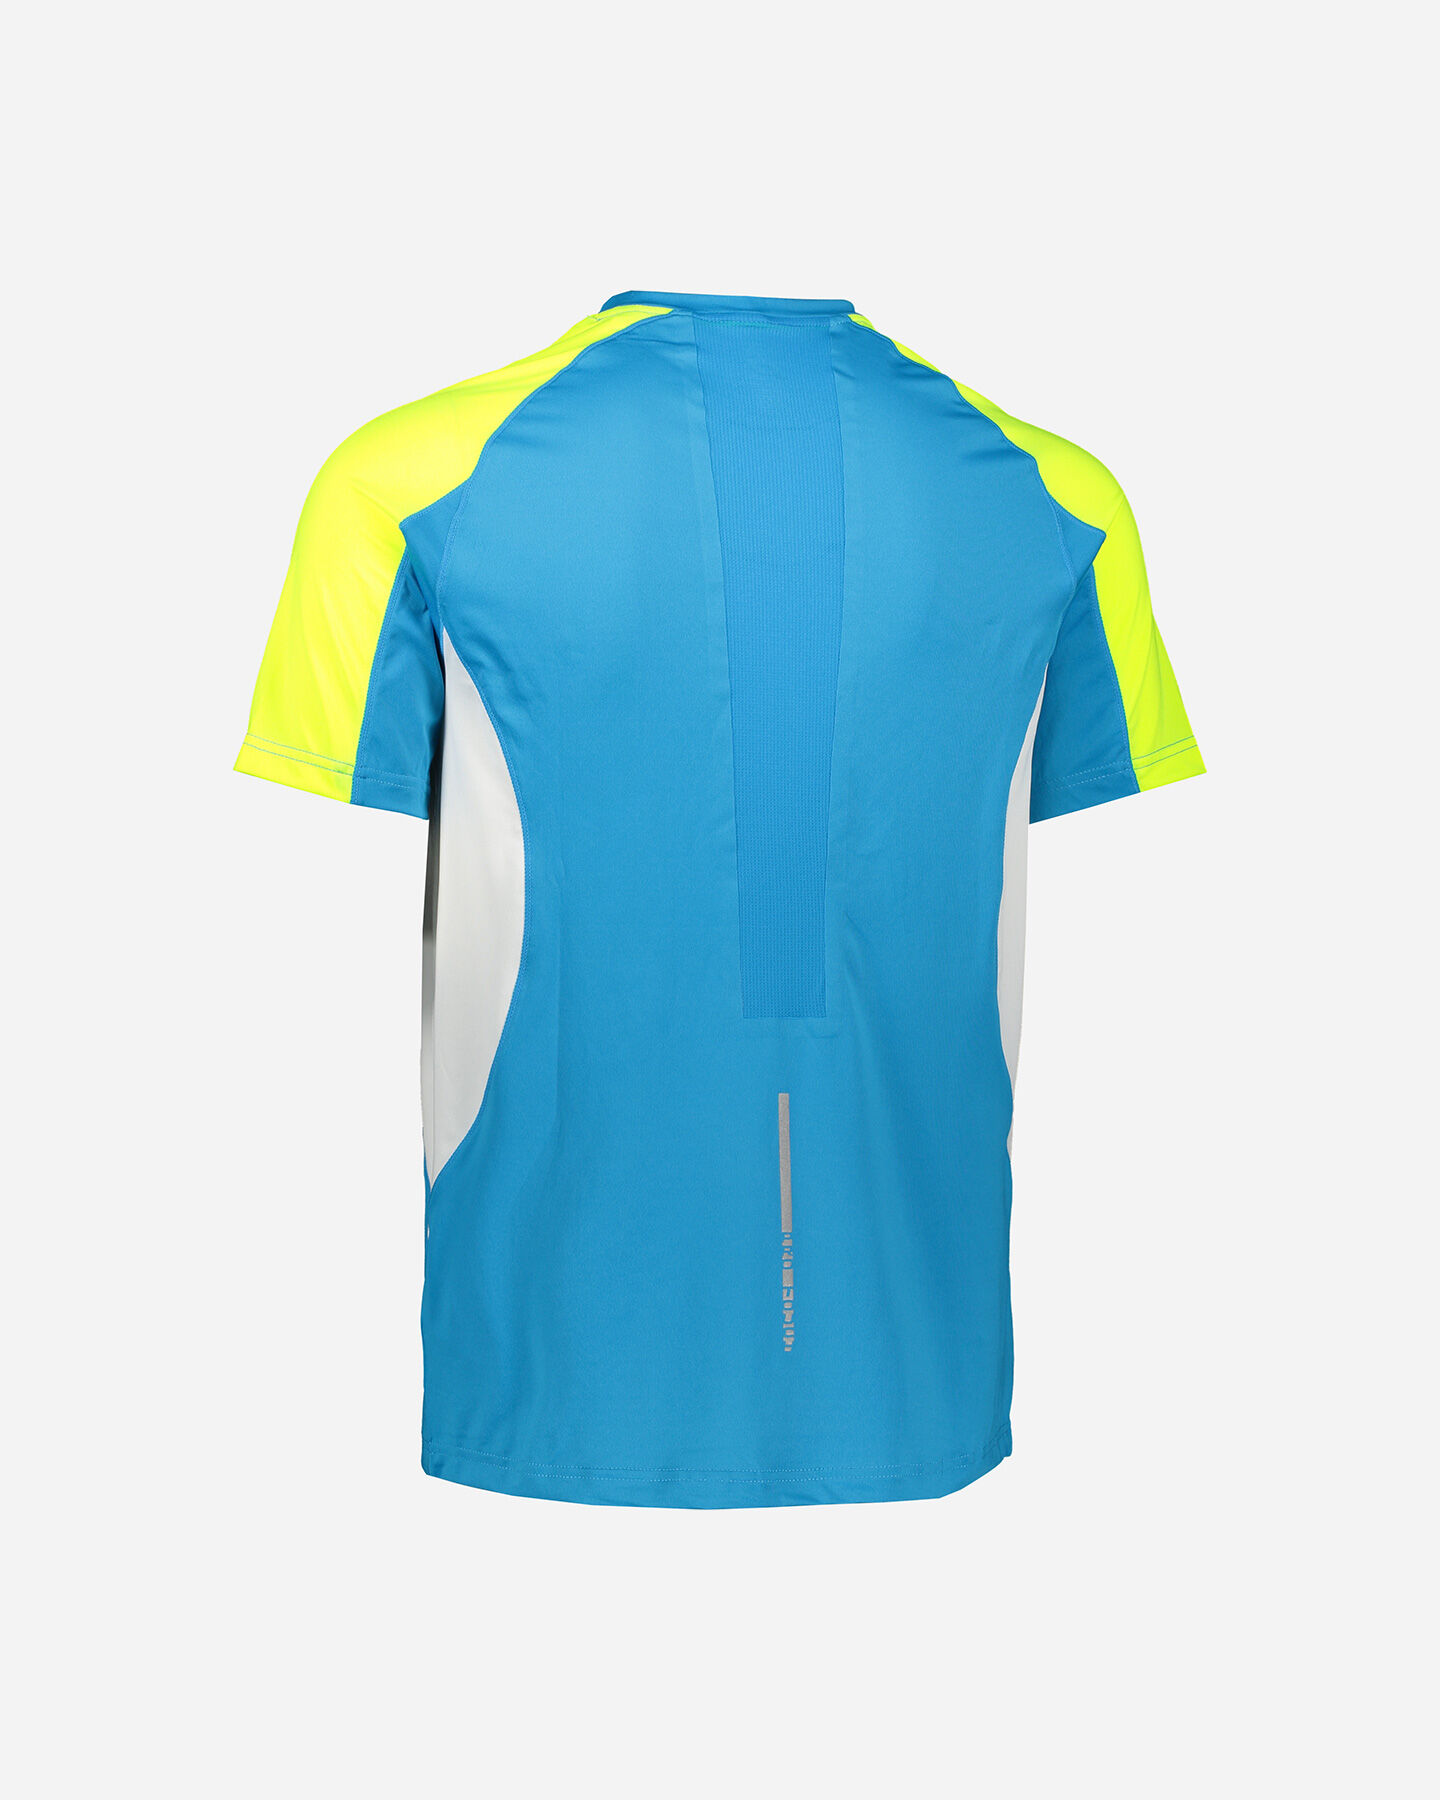  T-Shirt running PRO TOUCH INOS M S5172958|904|S scatto 1